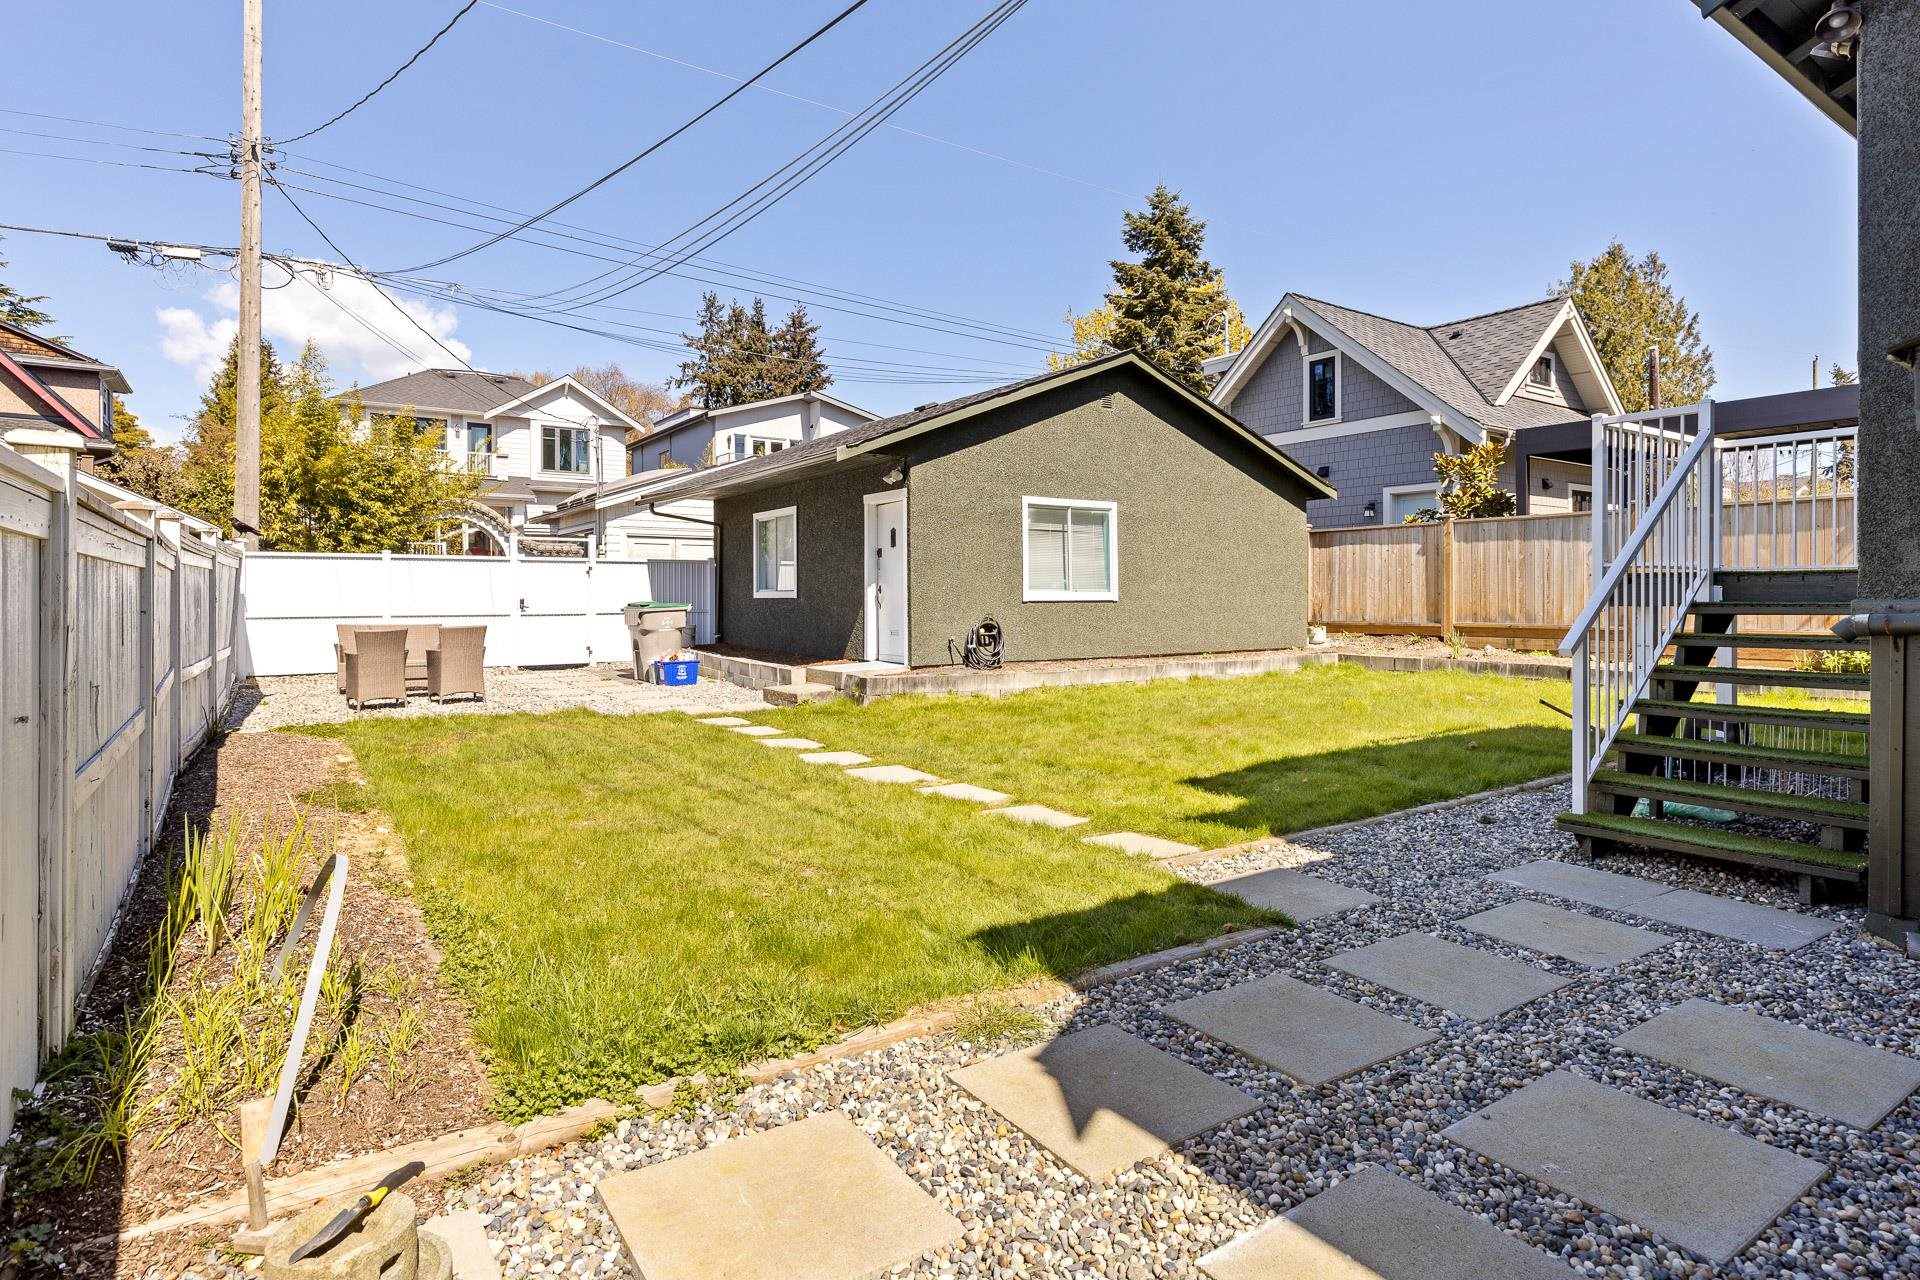 Listing image of 3719 3RD AVENUE